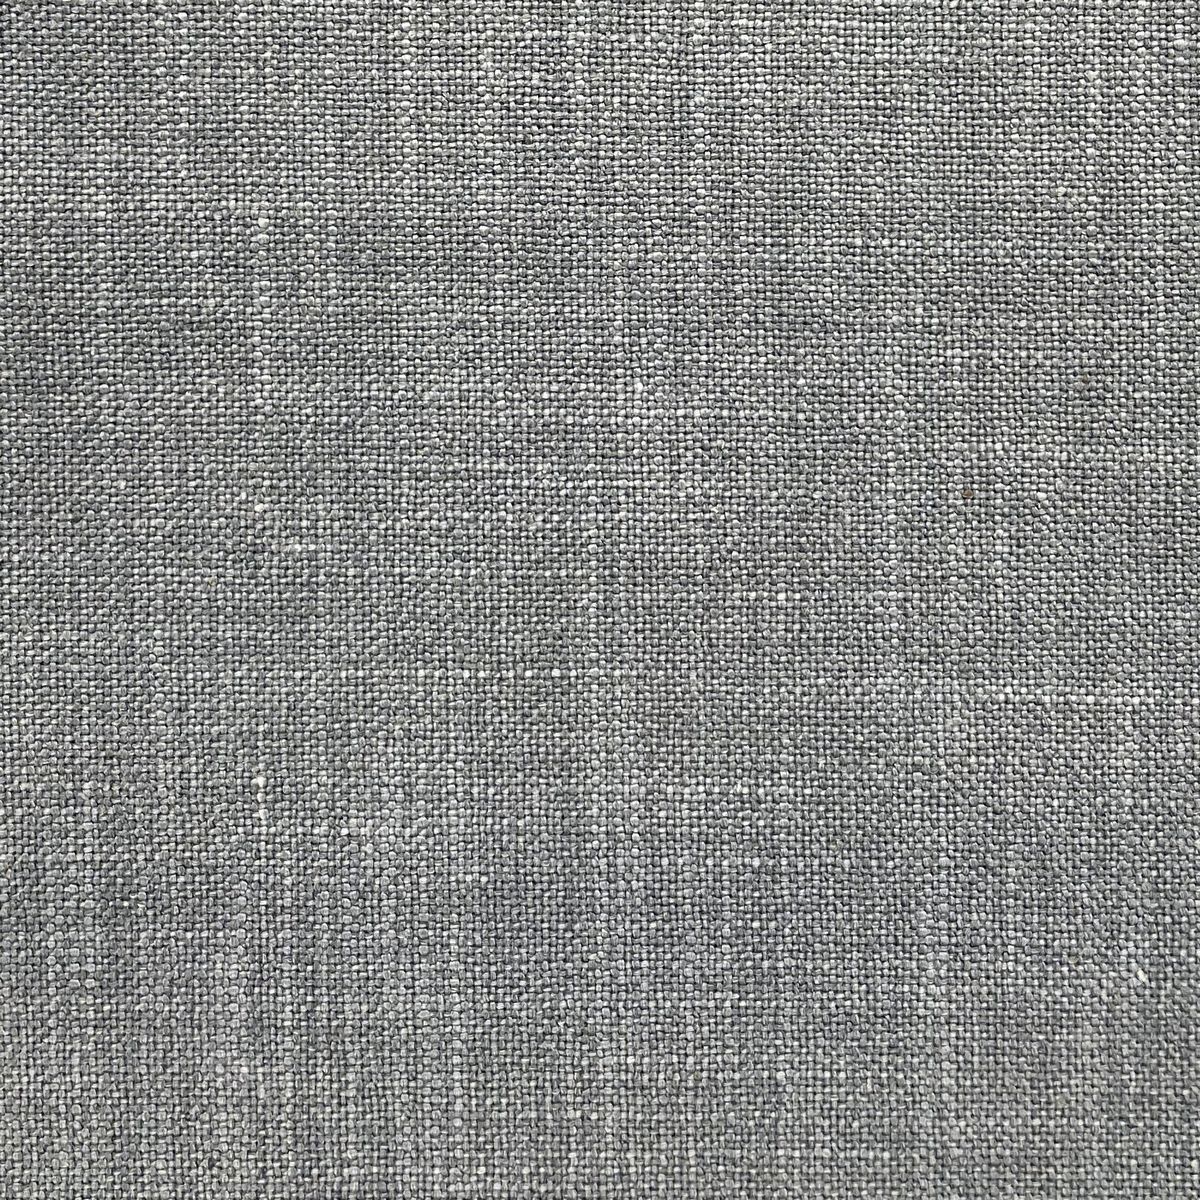 Cotswold Chambray Fabric by Chatham Glyn